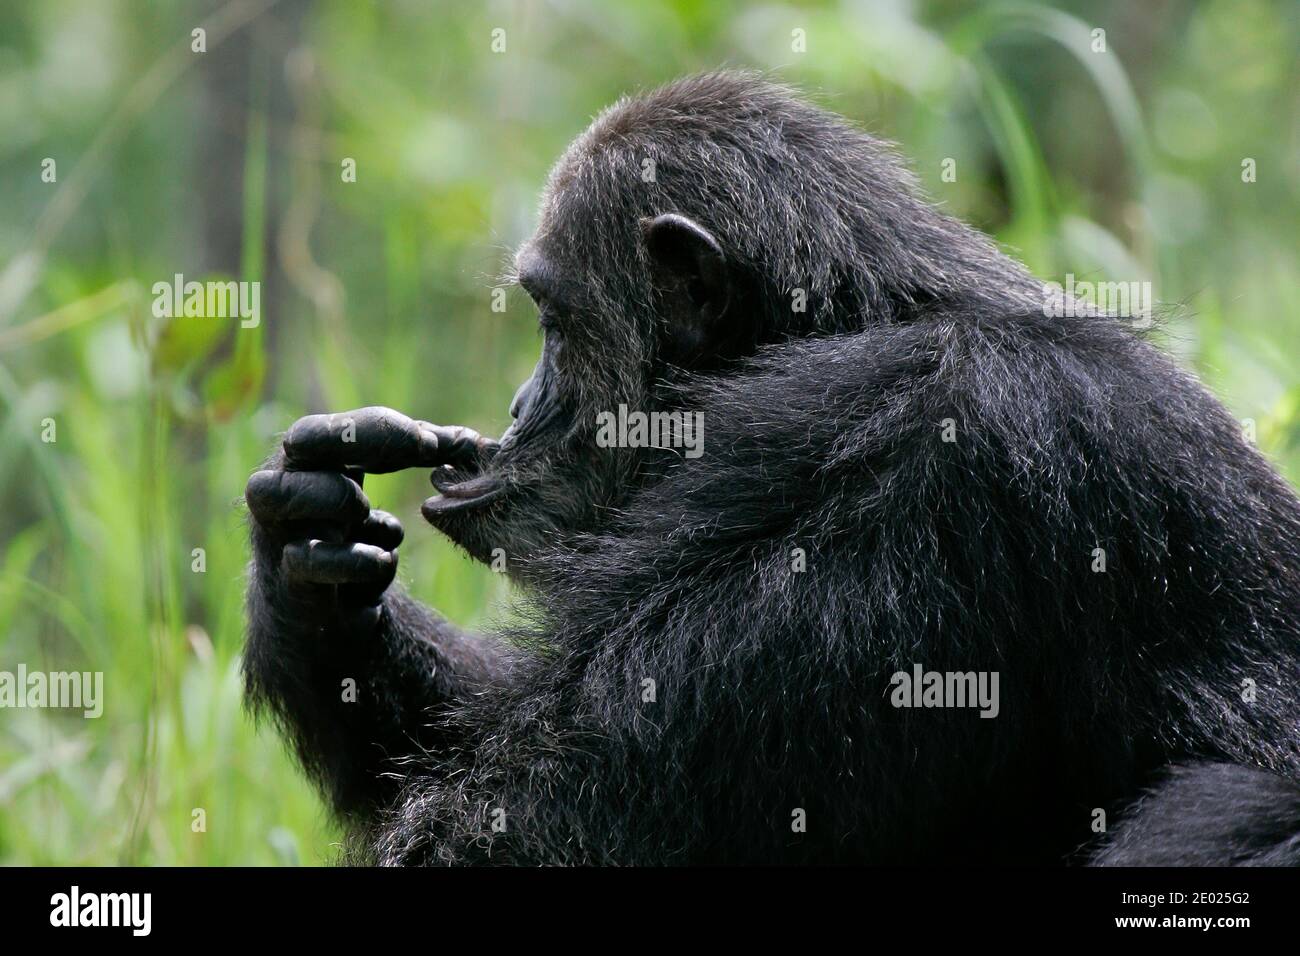 Eastern chimpanzee (Pan troglodytes schweinfurthii) playing with fingers in its face, Gombe Stream National Park, Tanzania Stock Photo